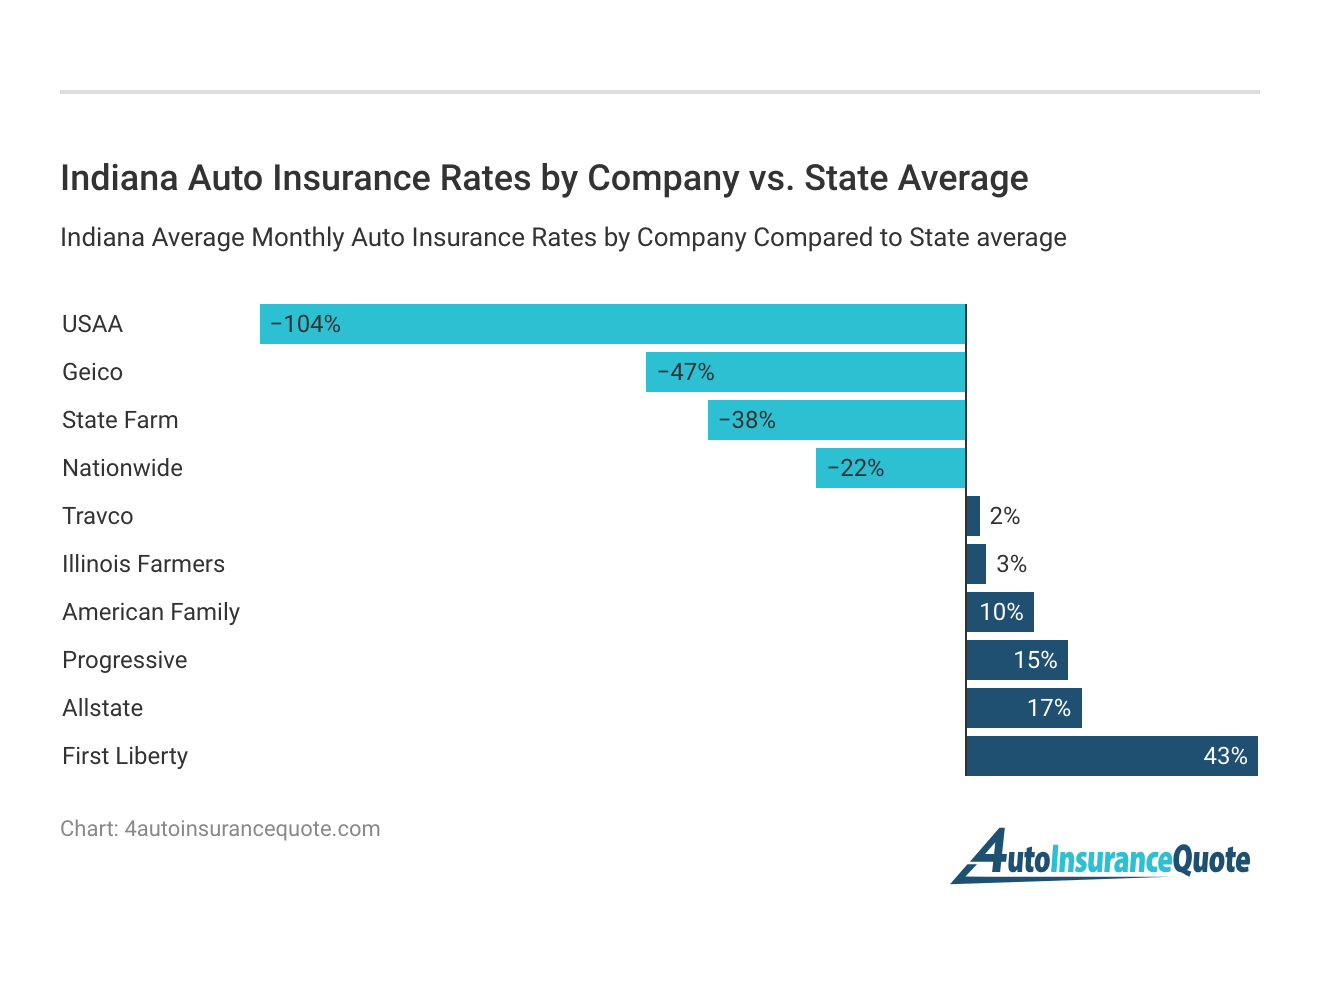 <h3>Indiana Auto Insurance Rates by Company vs. State Average</h3>